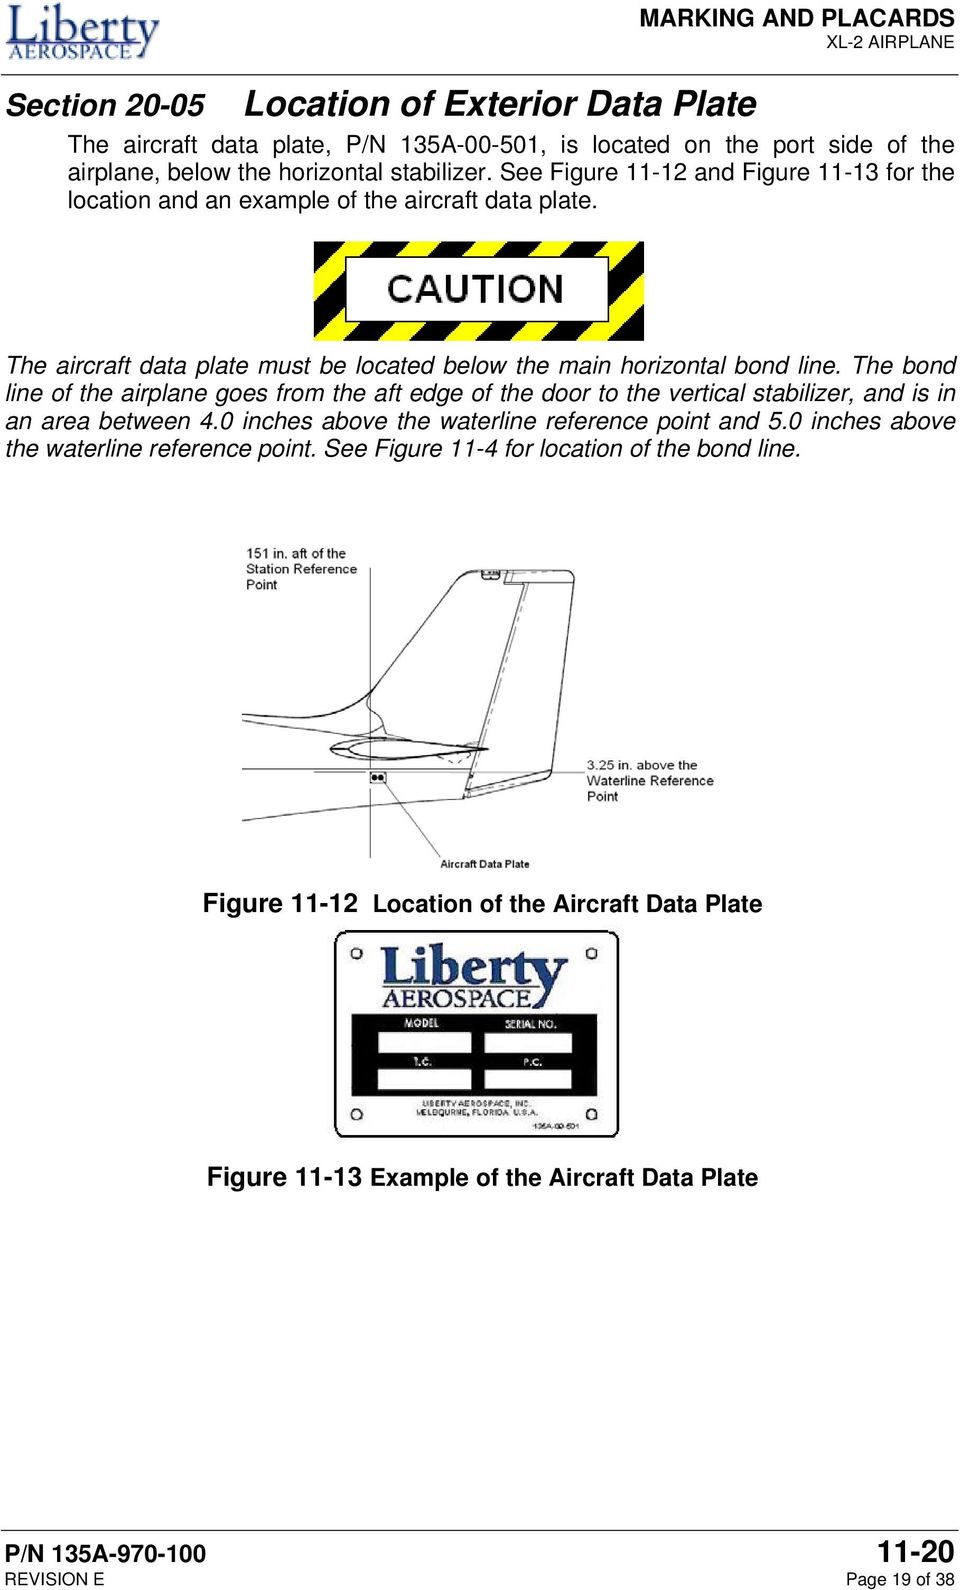 The bond line of the airplane goes from the aft edge of the door to the vertical stabilizer, and is in an area between 4.0 inches above the waterline reference point and 5.